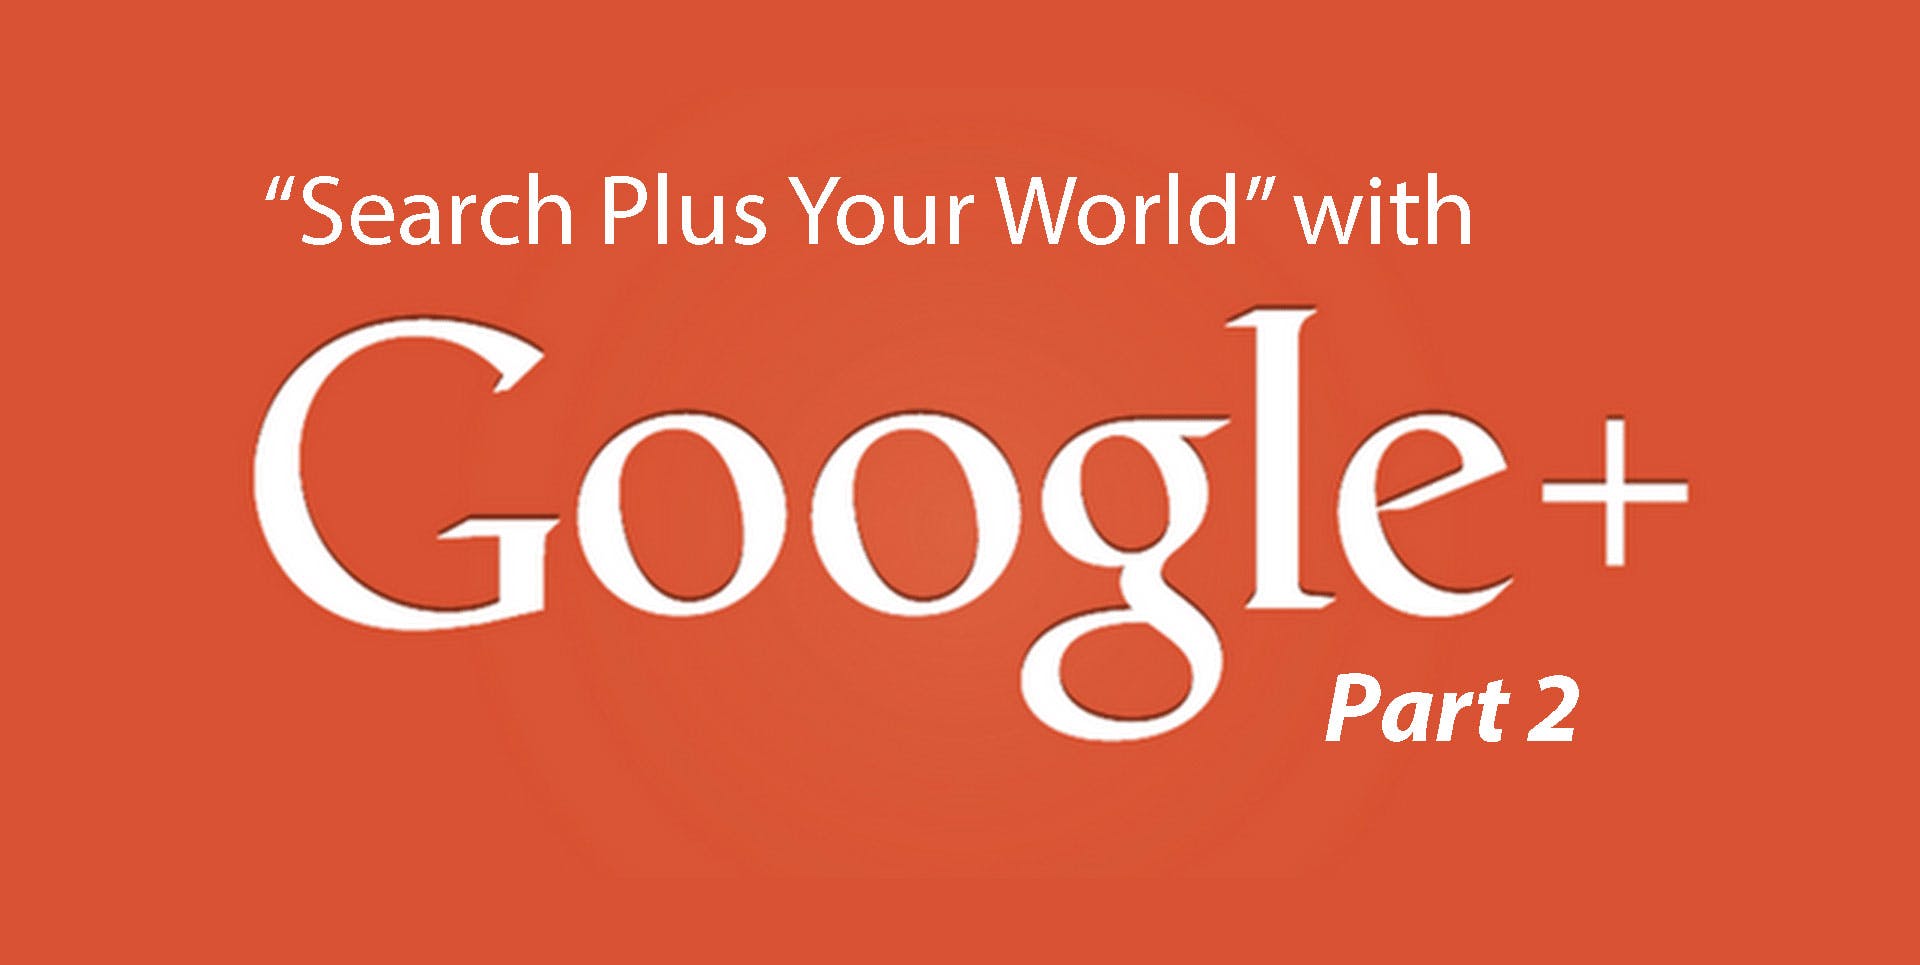 Search Plus Your World with Google + Part 2